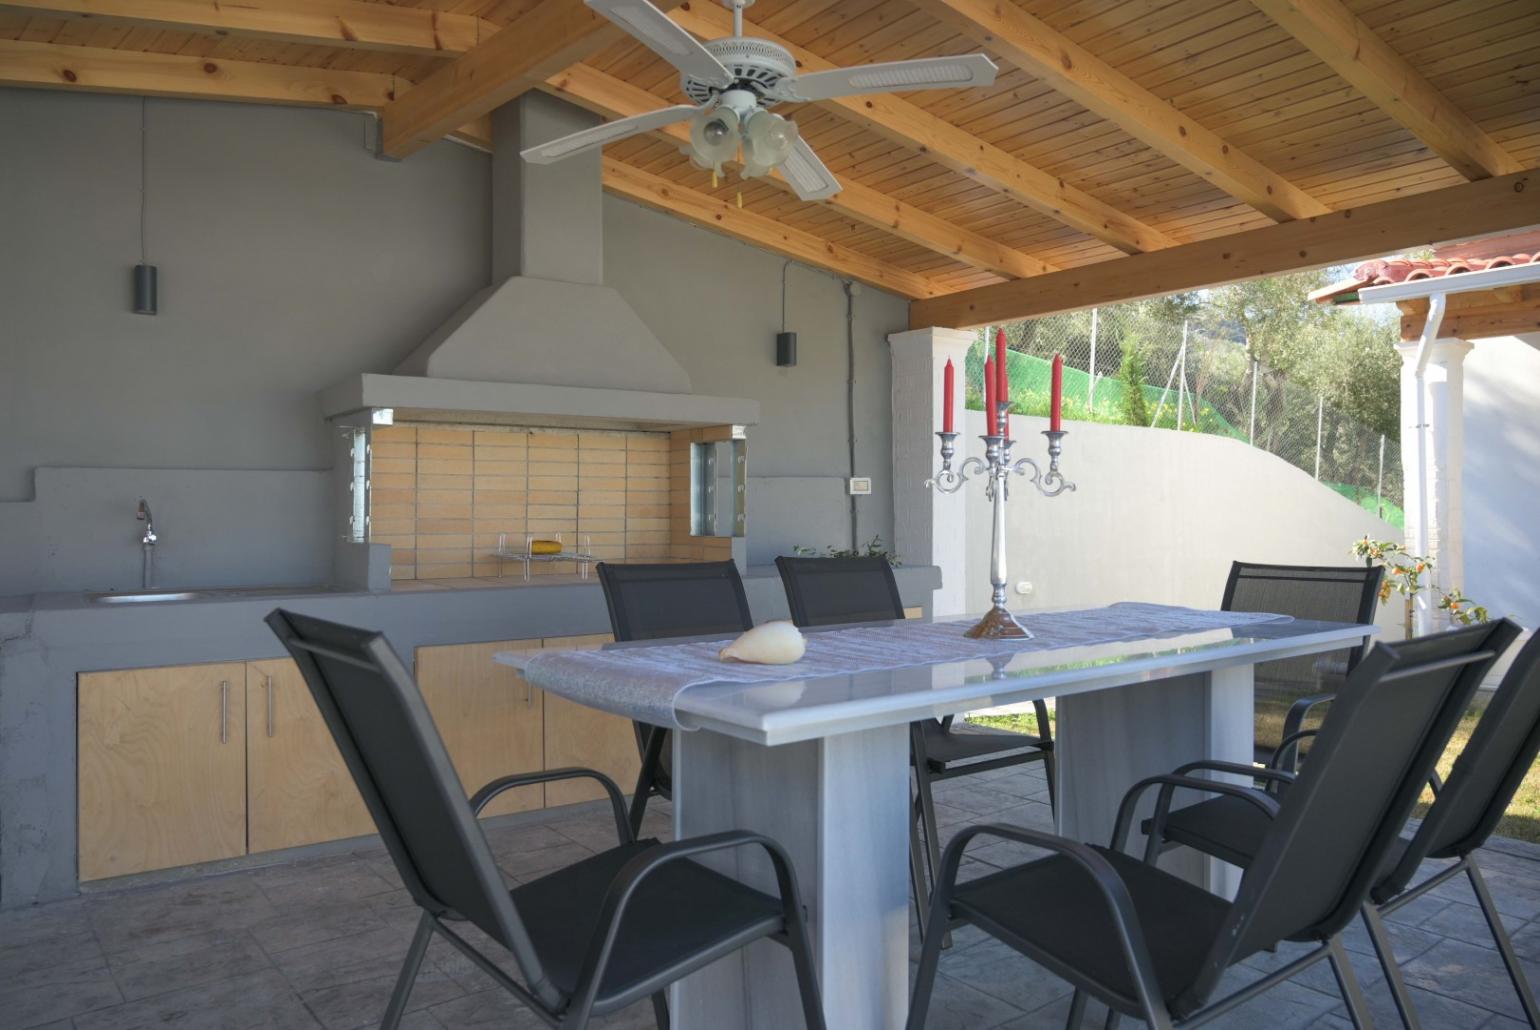 Outdoor kitchen, BBQ and dining table